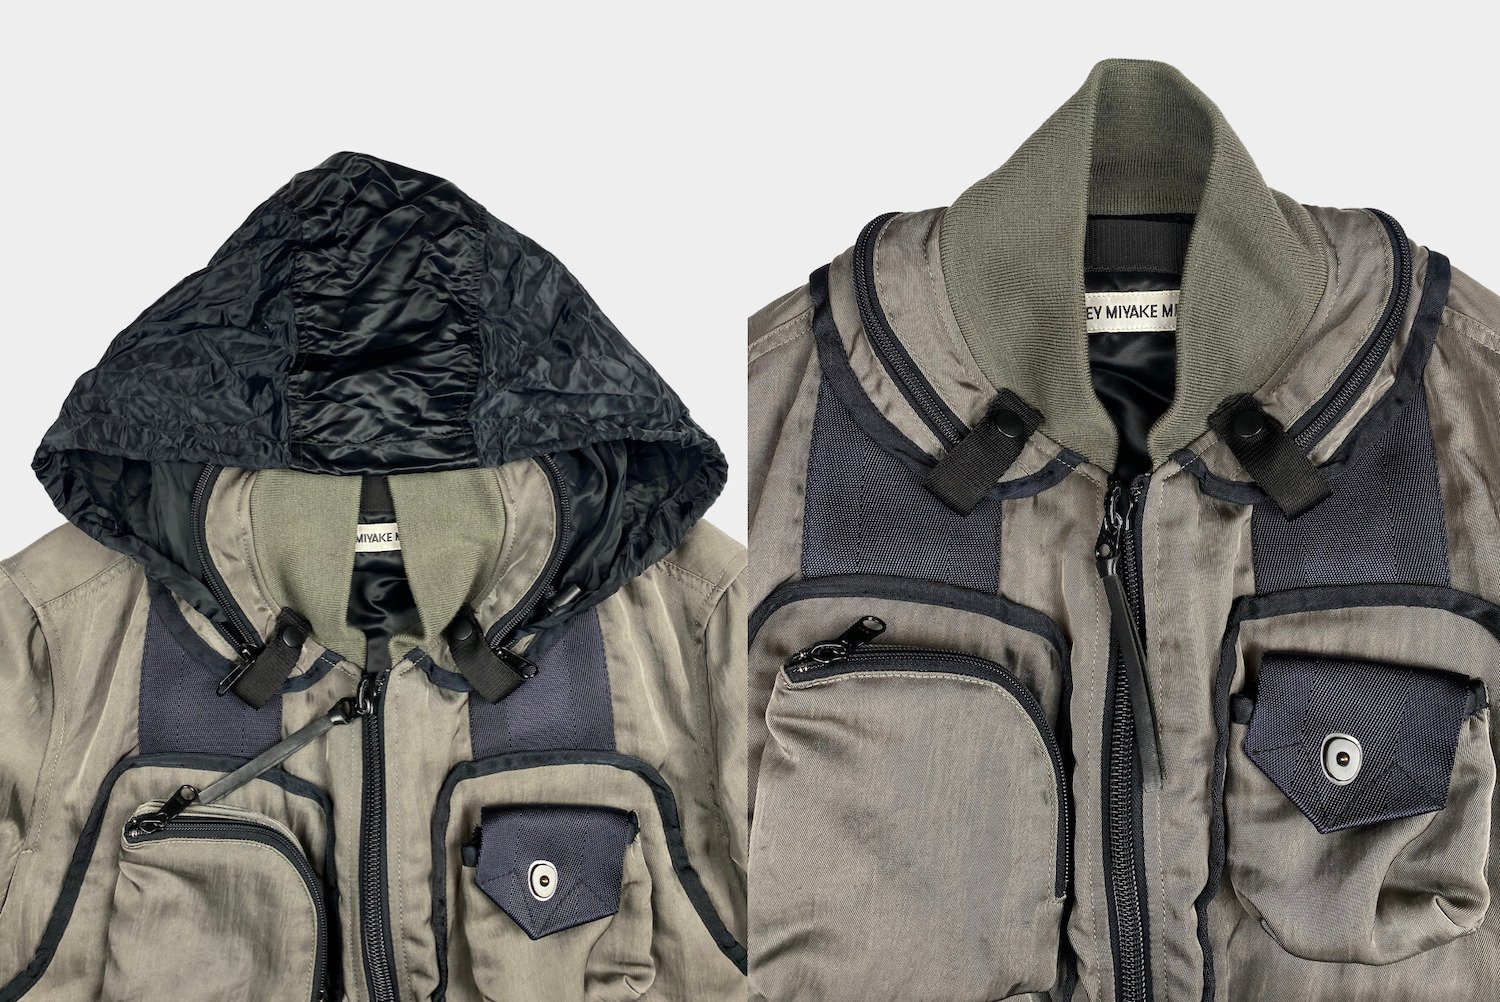 Revisiting the iconic Issey Miyake aviator jacket worn by tastemakers